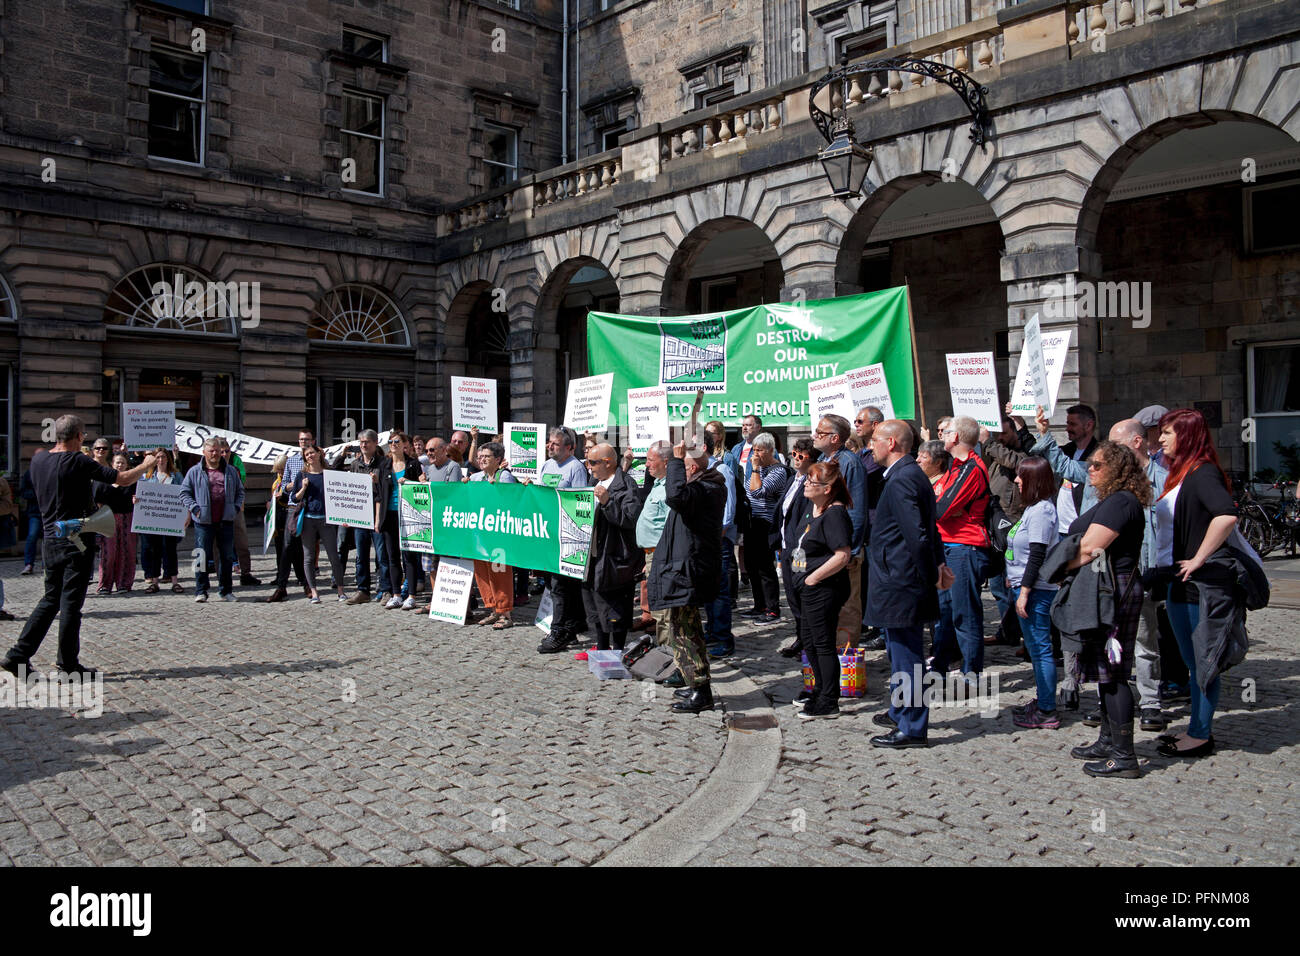 Edinburgh, Scotland, UK 22 August 2018. City Chambers offices. Campaigners against a proposed £50 million development in Leith handed in a petition with more  than 10,000 signatures to the city council’s planning committee at the City Chambers on the Royal Mile. 'Save Leith Walk' is a grassroots public campaign to prevent the demolition of the  sandstone building and influence what is built on the site. Stock Photo